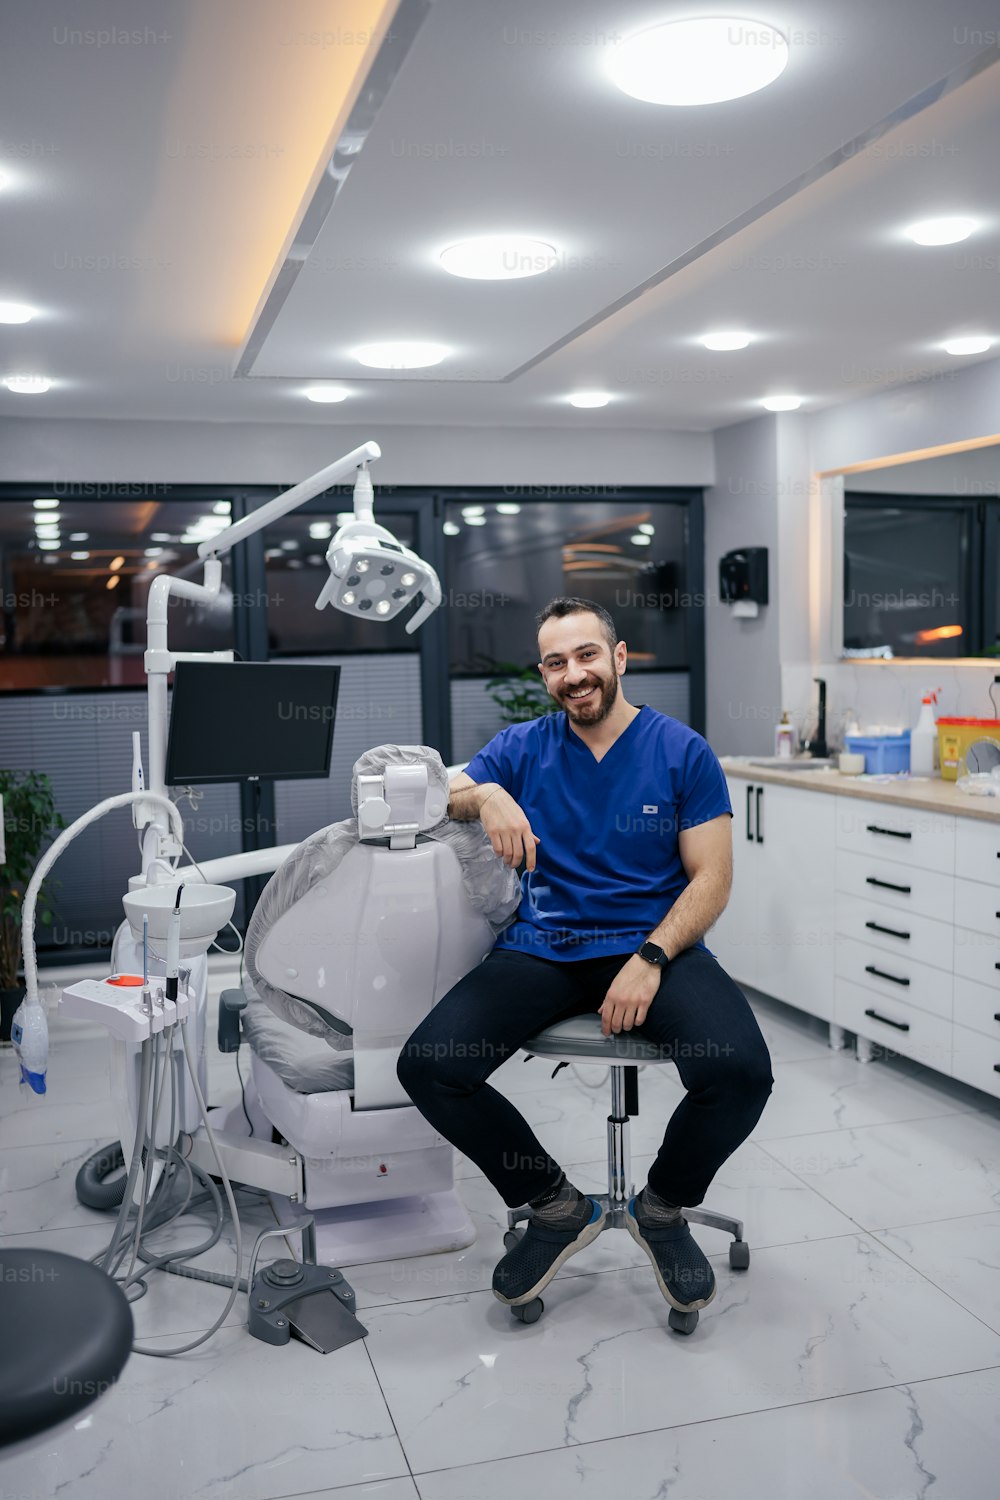 a man sitting on a chair in a dentist's office